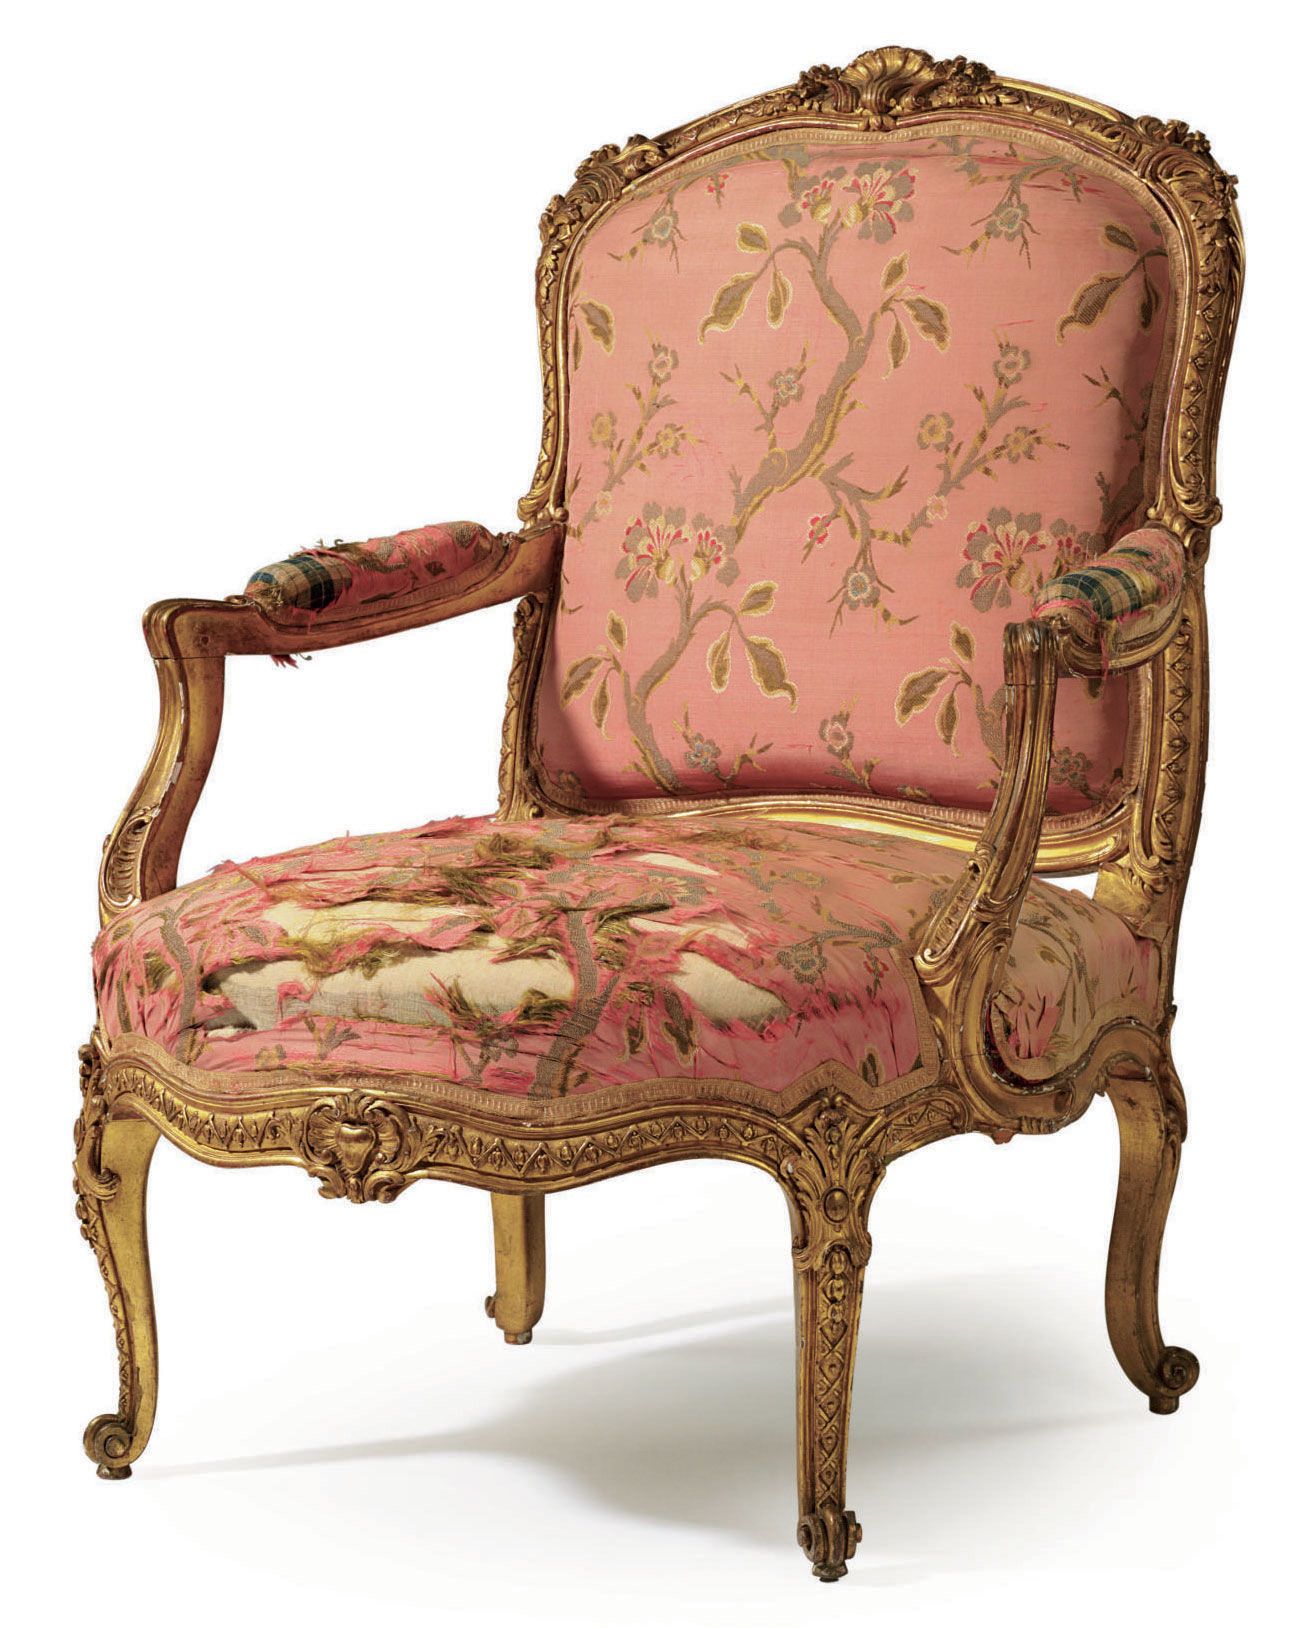 Fauteuil De Table Luxe C1765 70 A Late Louis Xv Giltwood Fauteuil attributed to